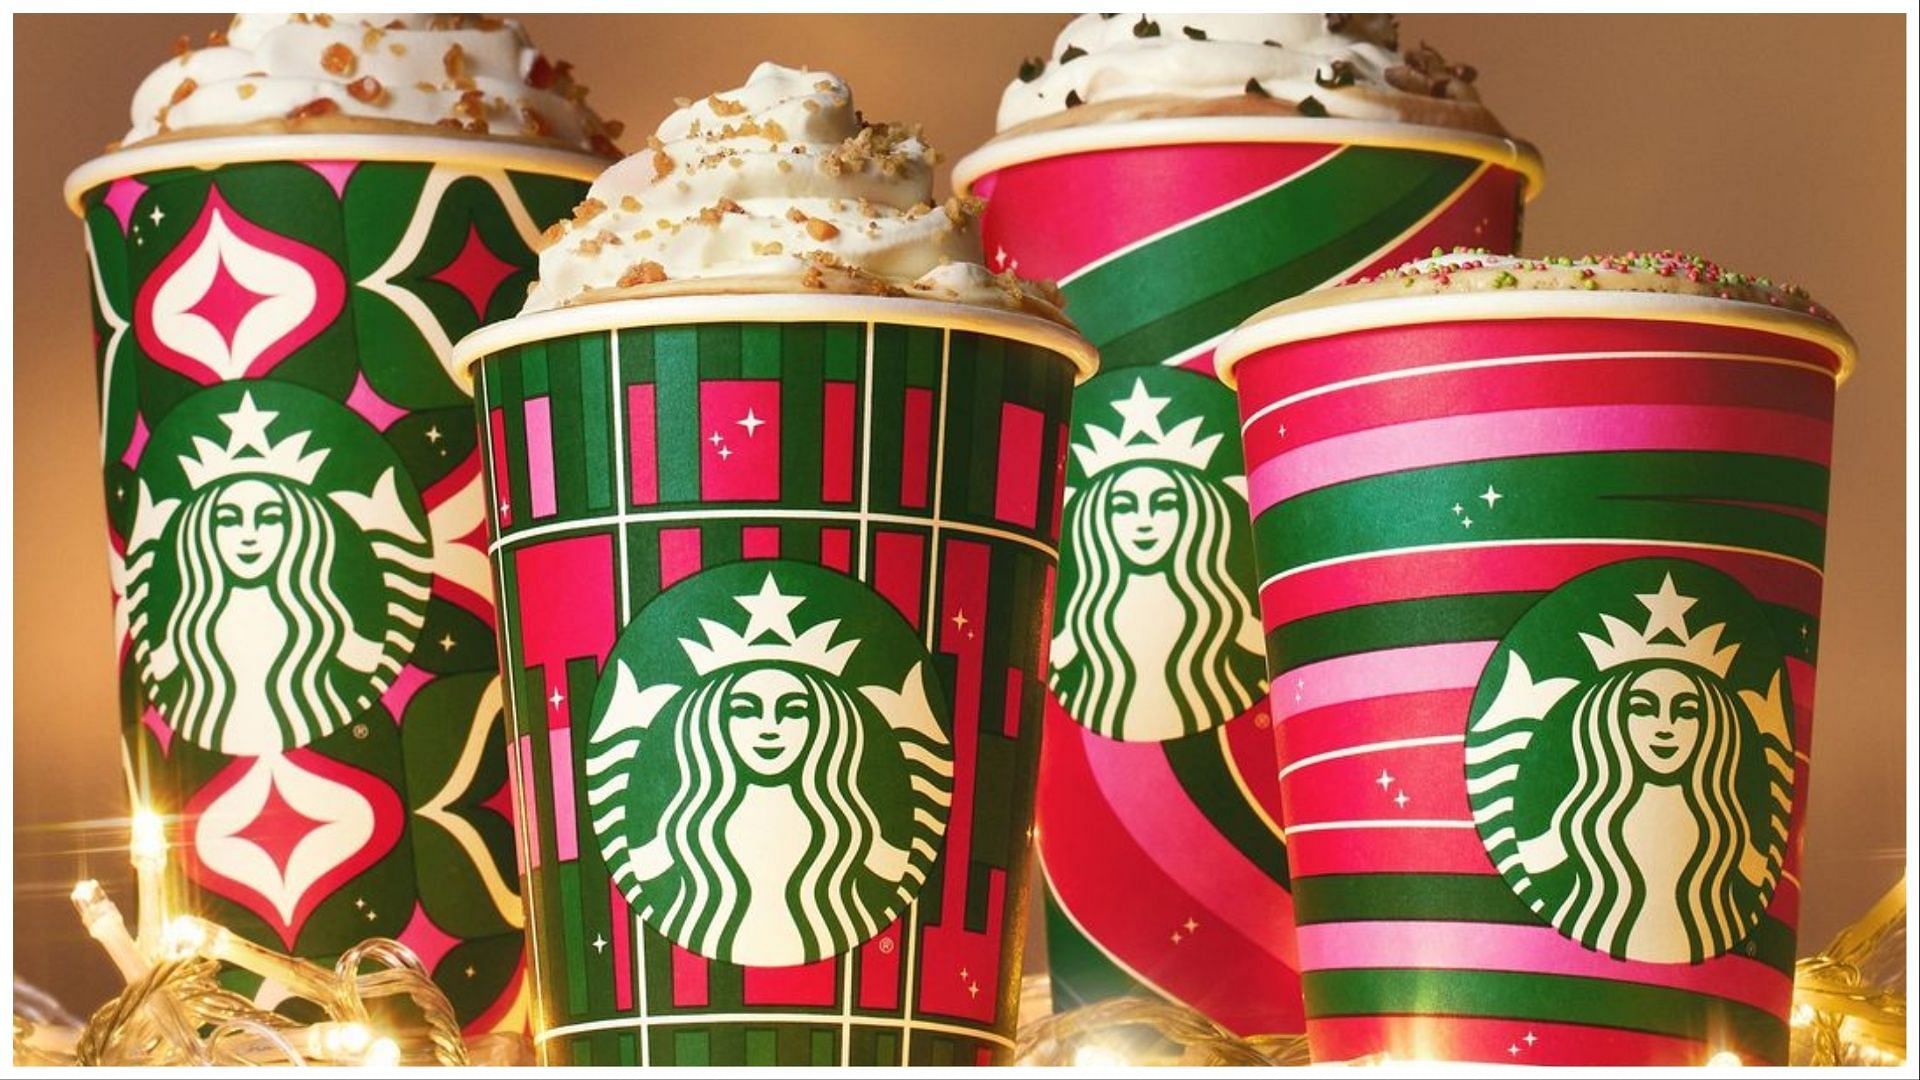 The new holiday beverage is Gingerbread Oatmilk Iced Chai (Image via Instagram / Starbucks)